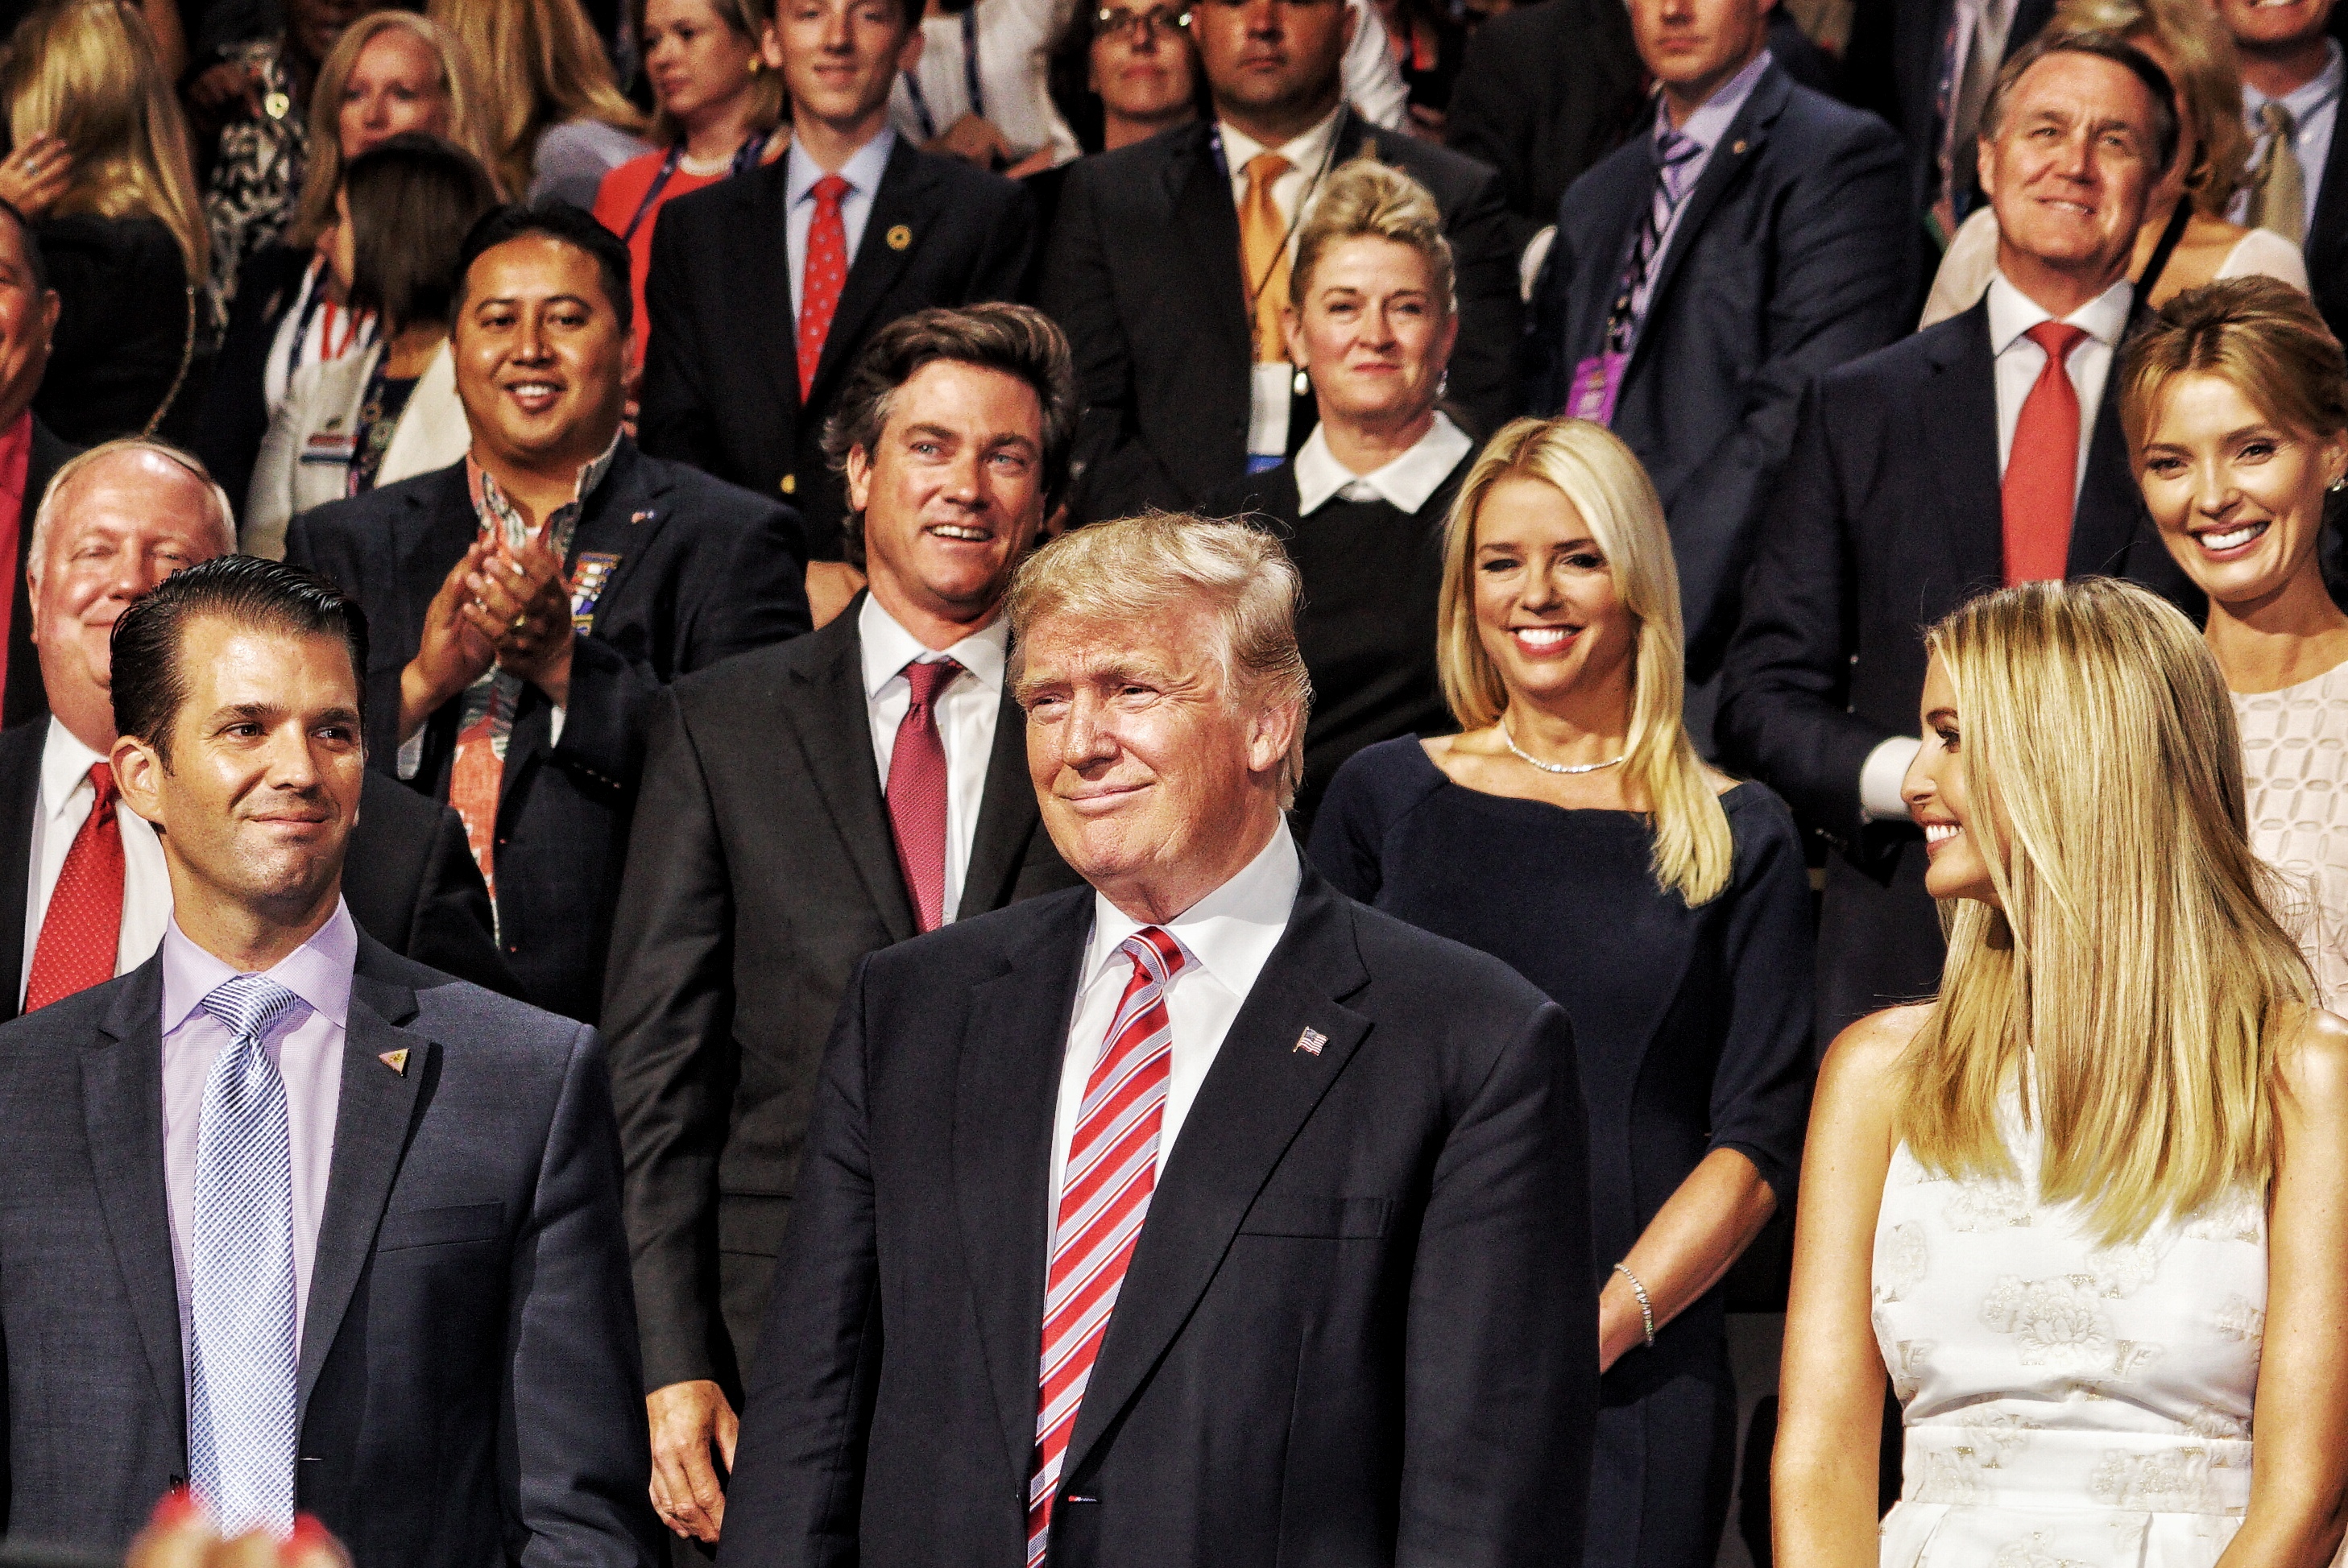 Donald Trump with his children Eric and Ivanka Trump at the Republican National Convention in Cleveland, on July 20, 2016. (Benjamin Lowy for TIME)